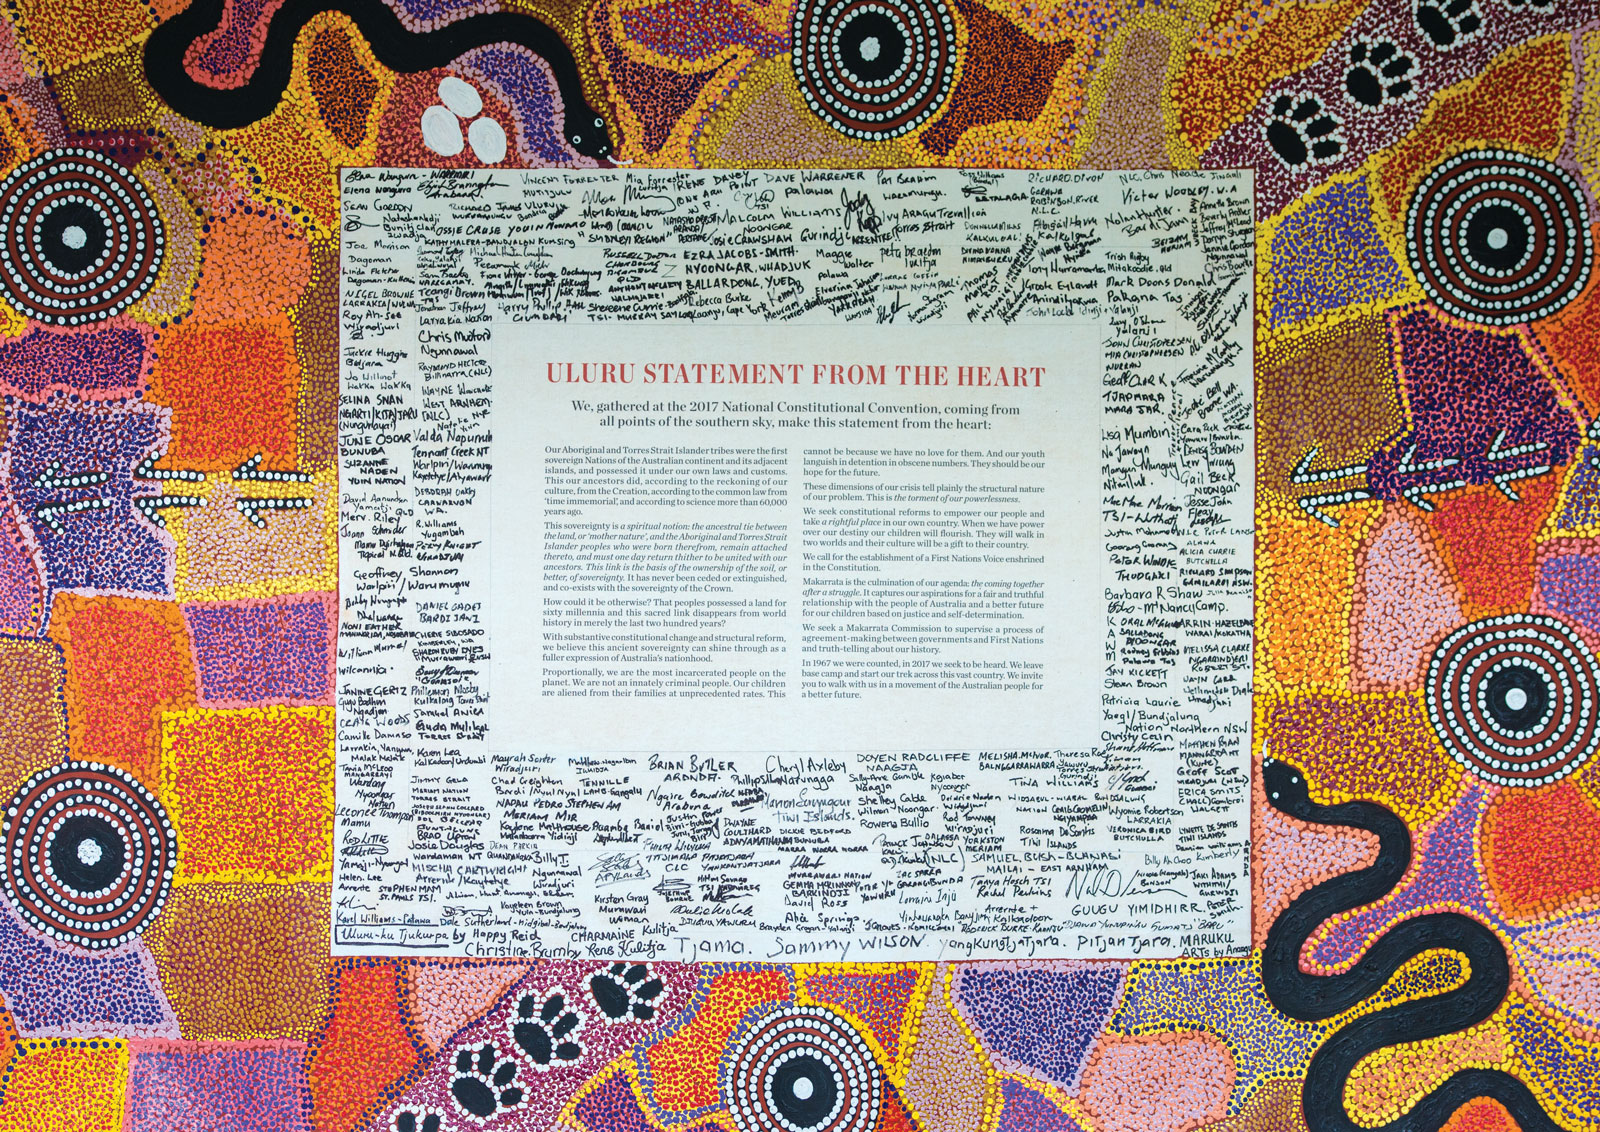 The Uluru Statement from the Heart was made on the 26 May 2017 by delegates at the Referendum Convention at Uluru.